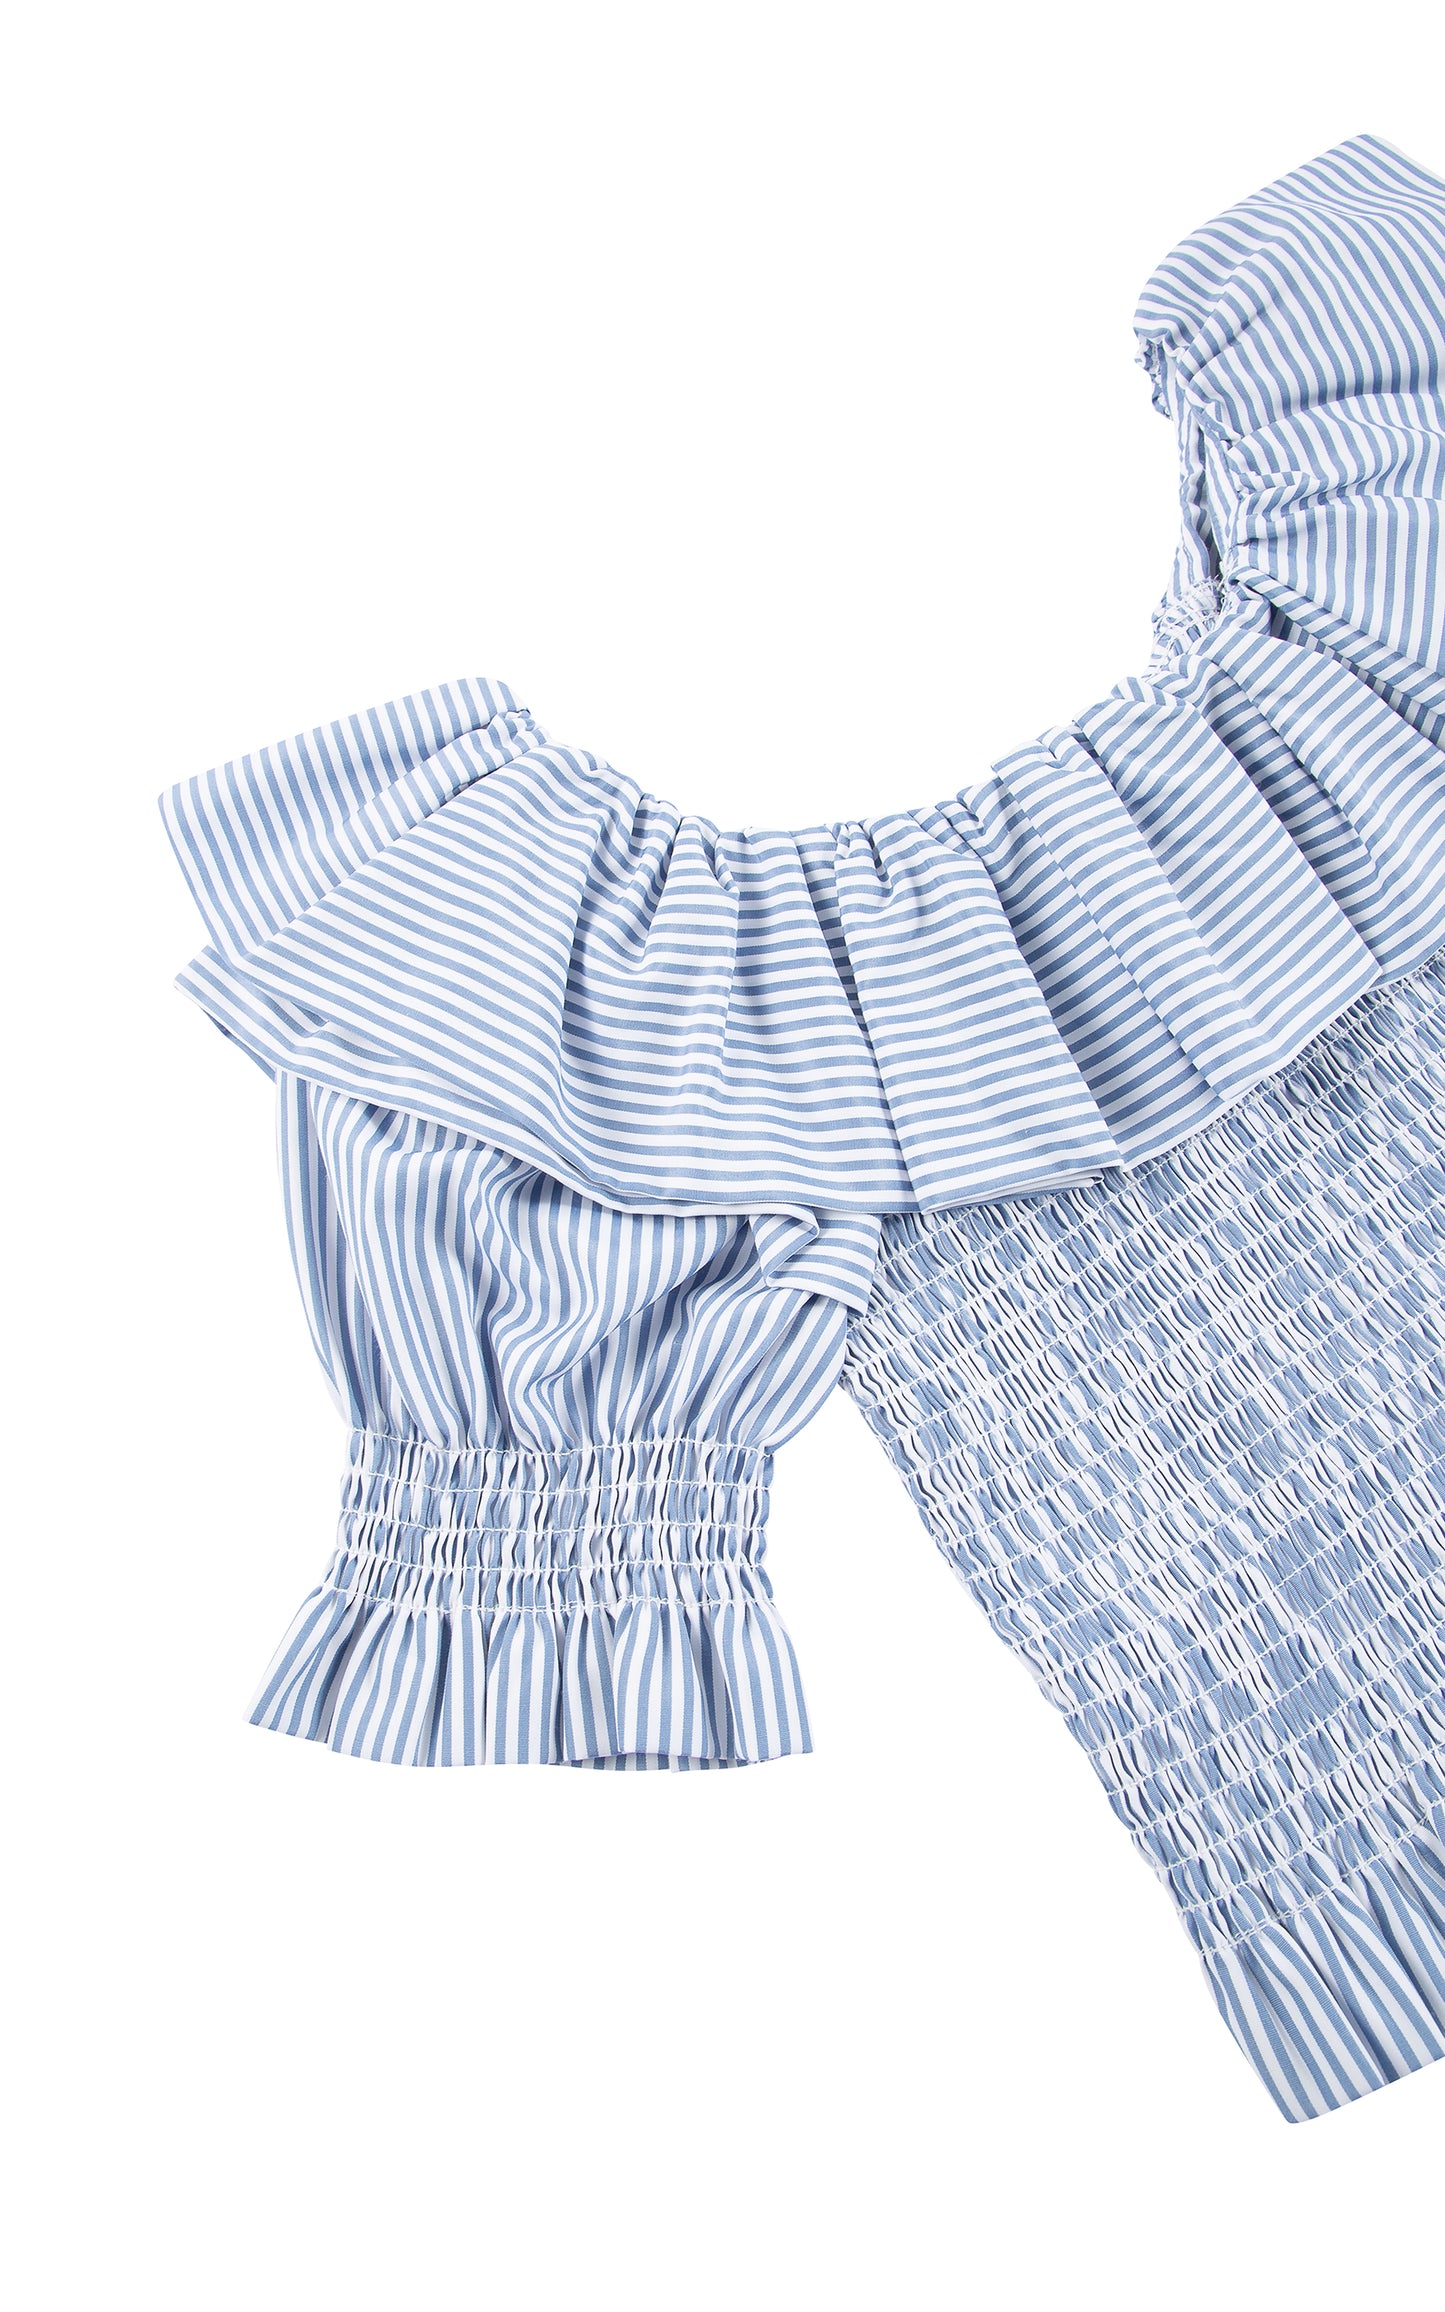 CLOSE UP OF BLUE AND WHITE STRIPED THREE-QUARTER-LENGTH SLEEVE TOP WITH A WIDE RUFFLED NECKLINE AND A SMOCKED BODICE